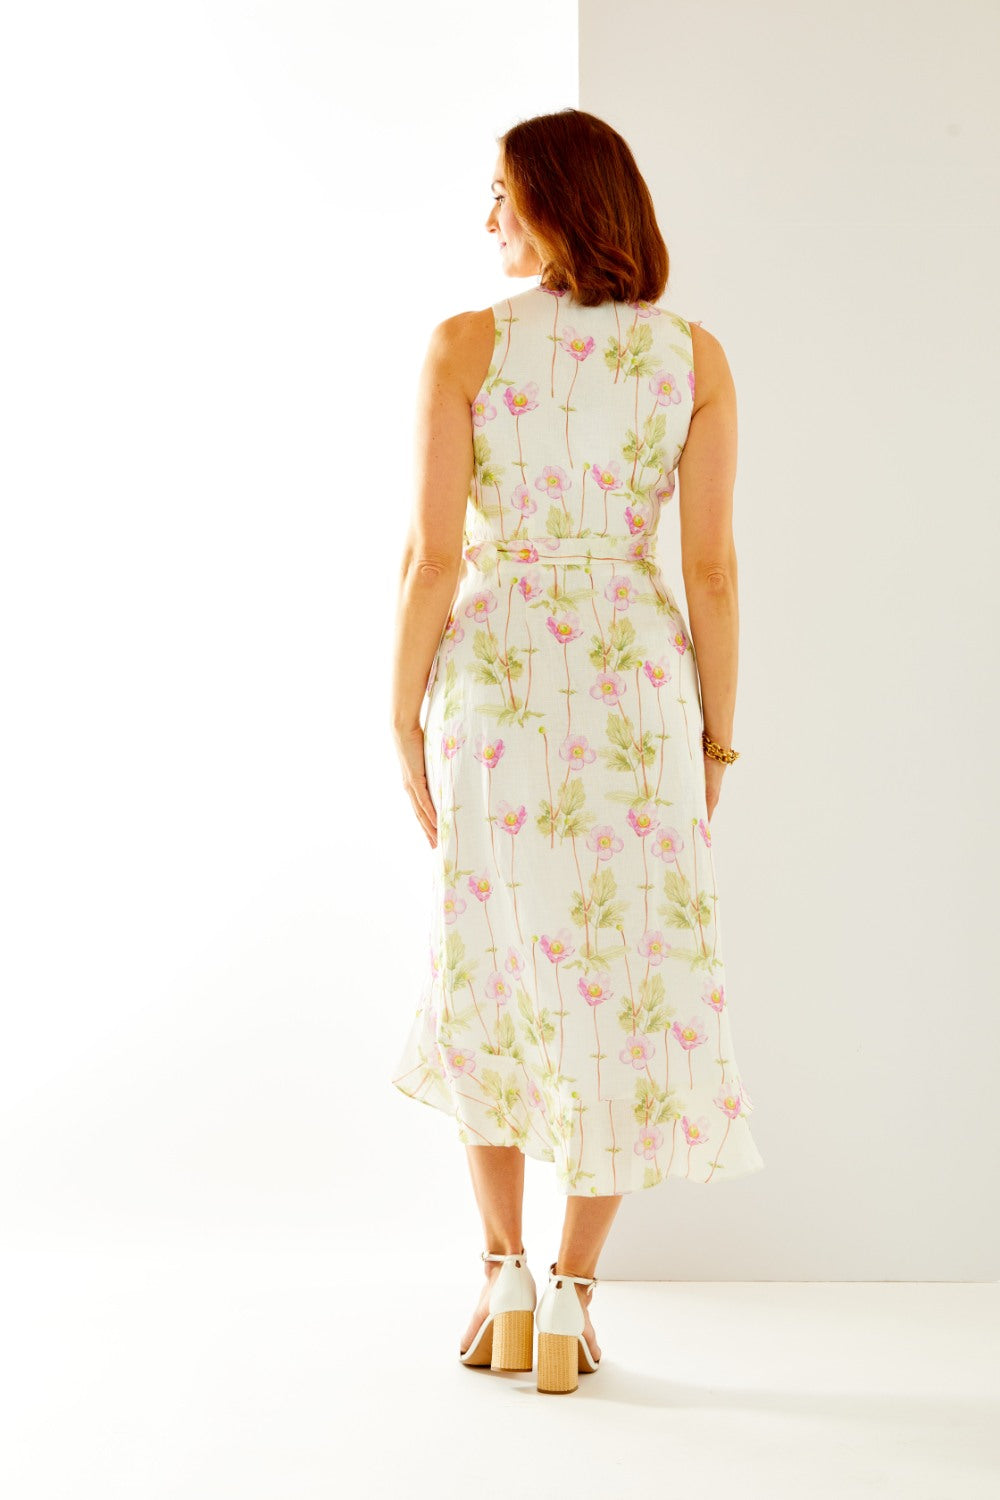 Woman in floral wrap dress